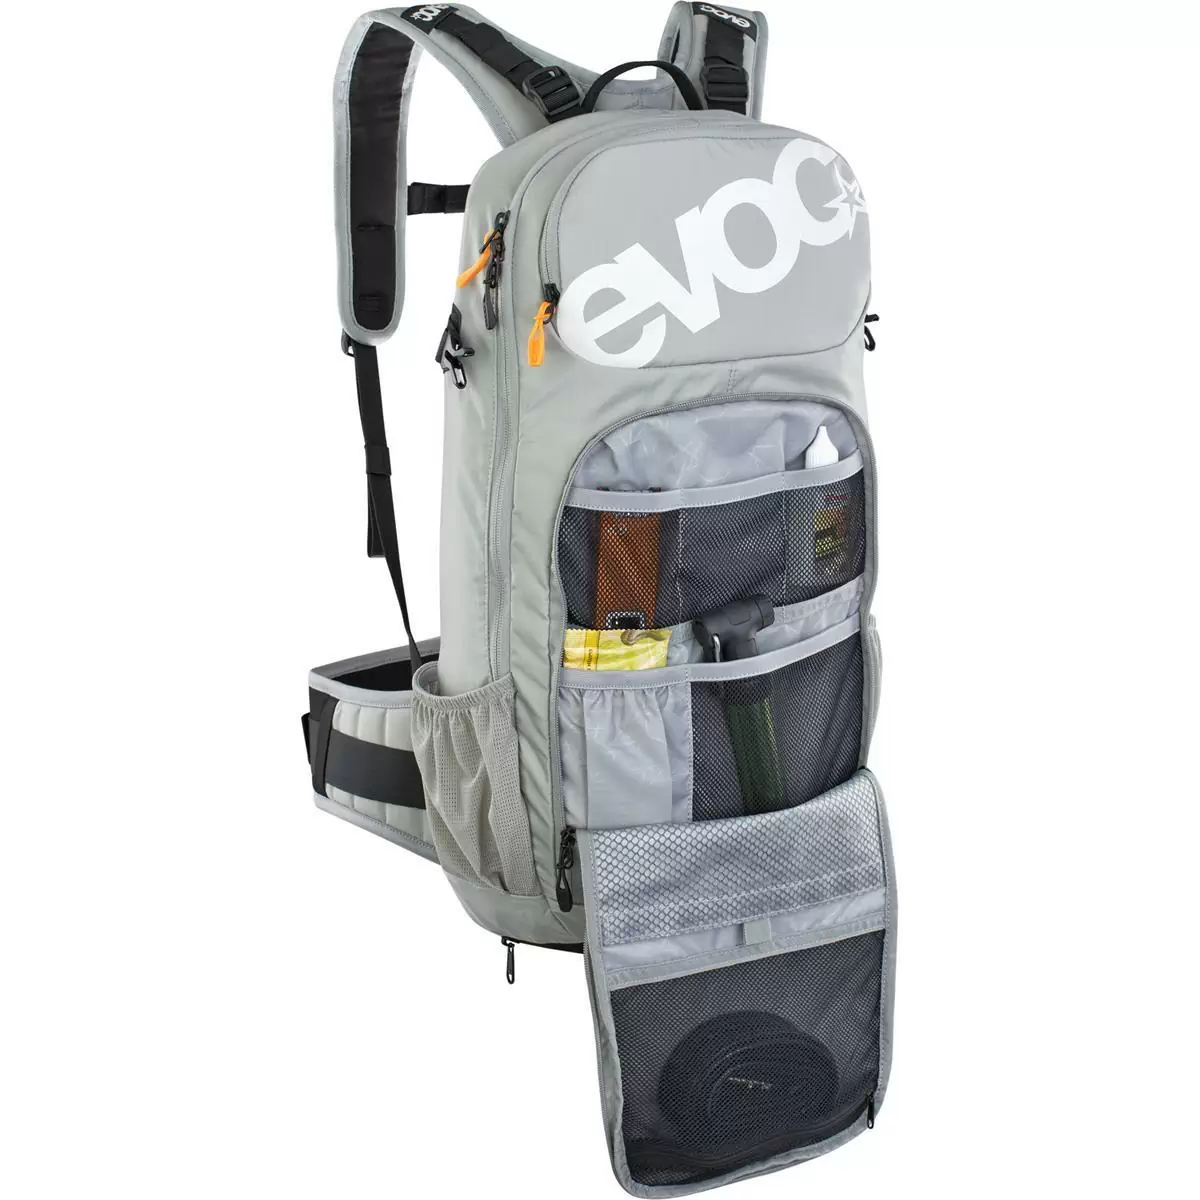 FR enduro backpack with Stone Gray Back Protector 16 Liters Size S #1